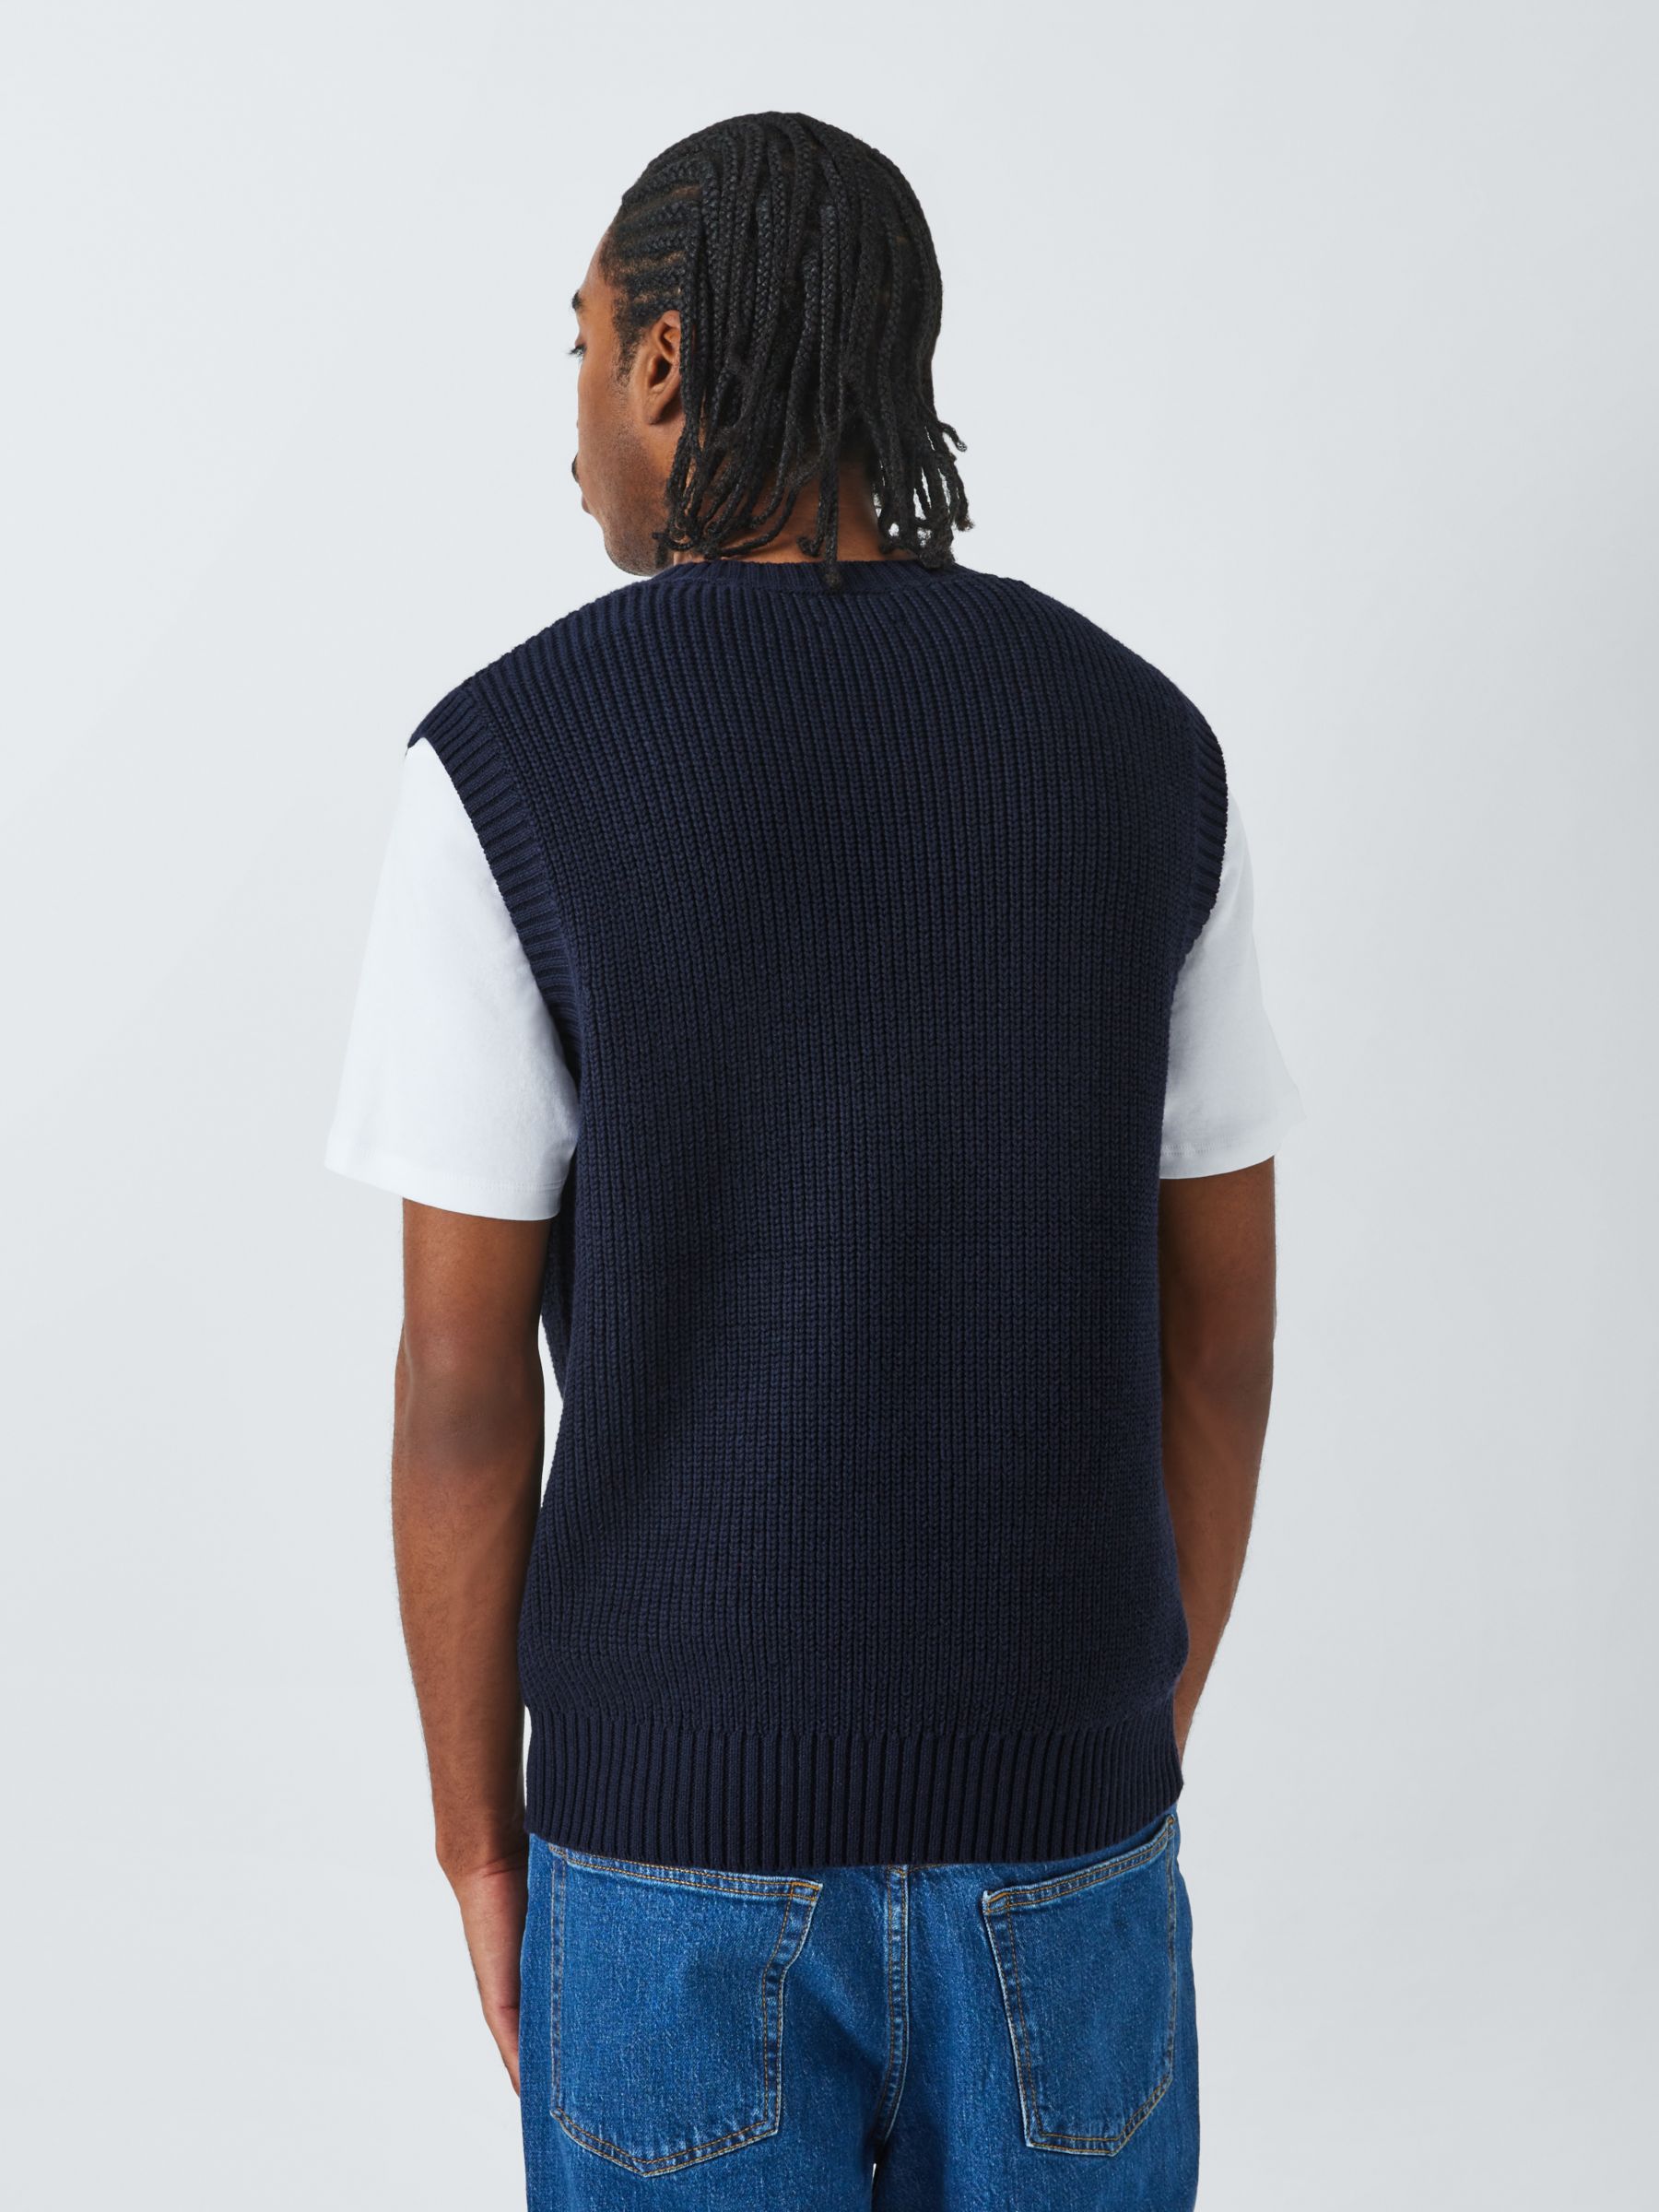 Buy John Lewis ANYDAY Knitted Vest, Baritone Blue Online at johnlewis.com